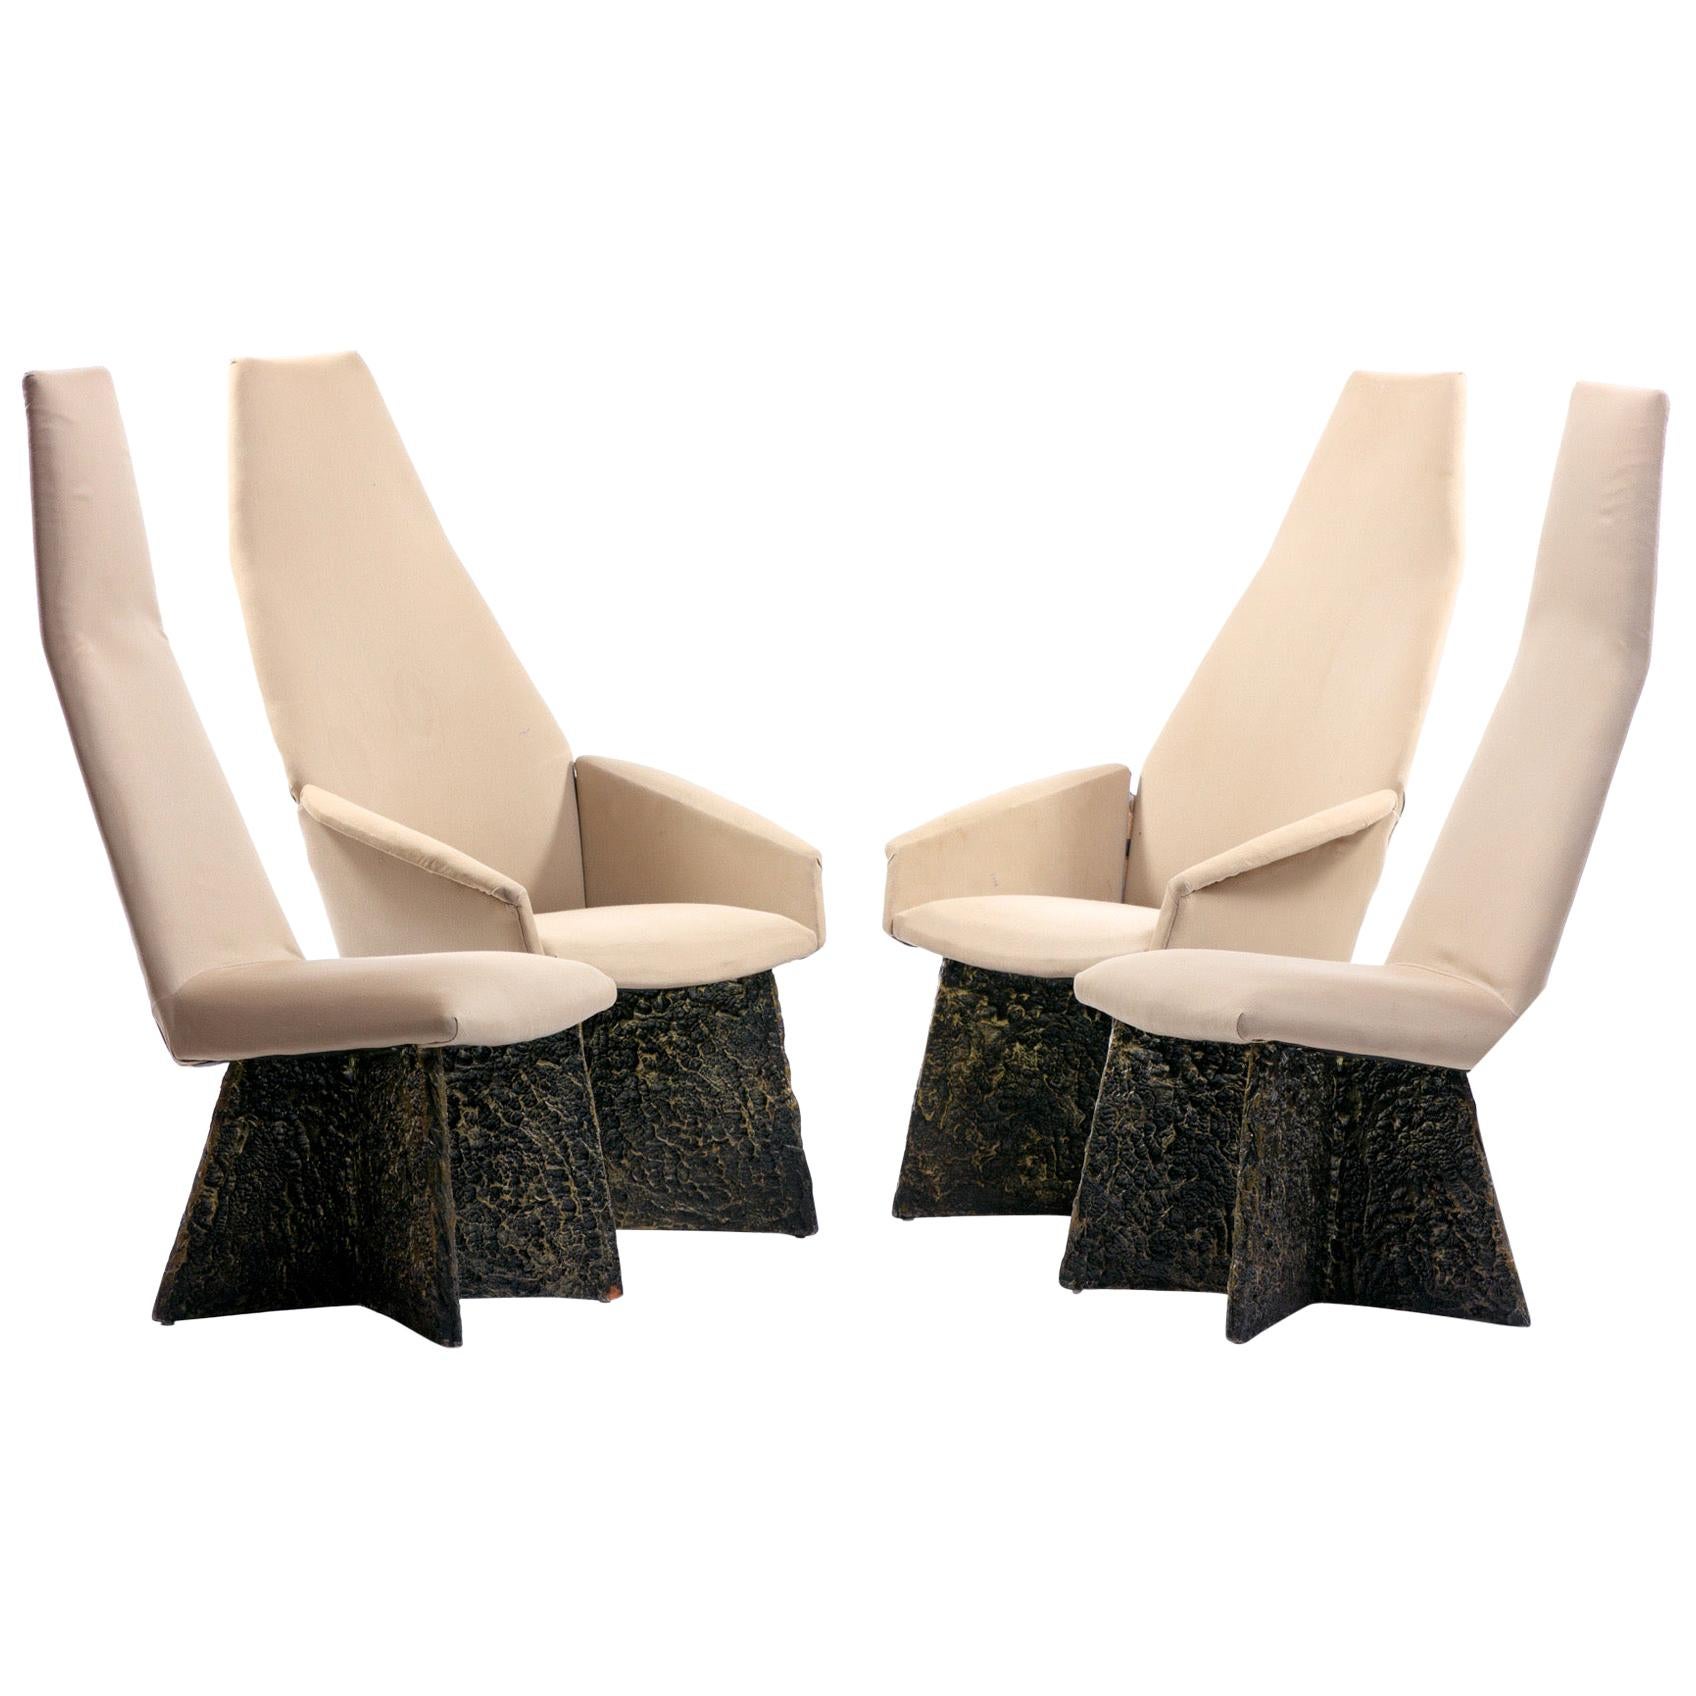 1970s Adrian Pearsall Brutalist Dining Chairs Set of 4